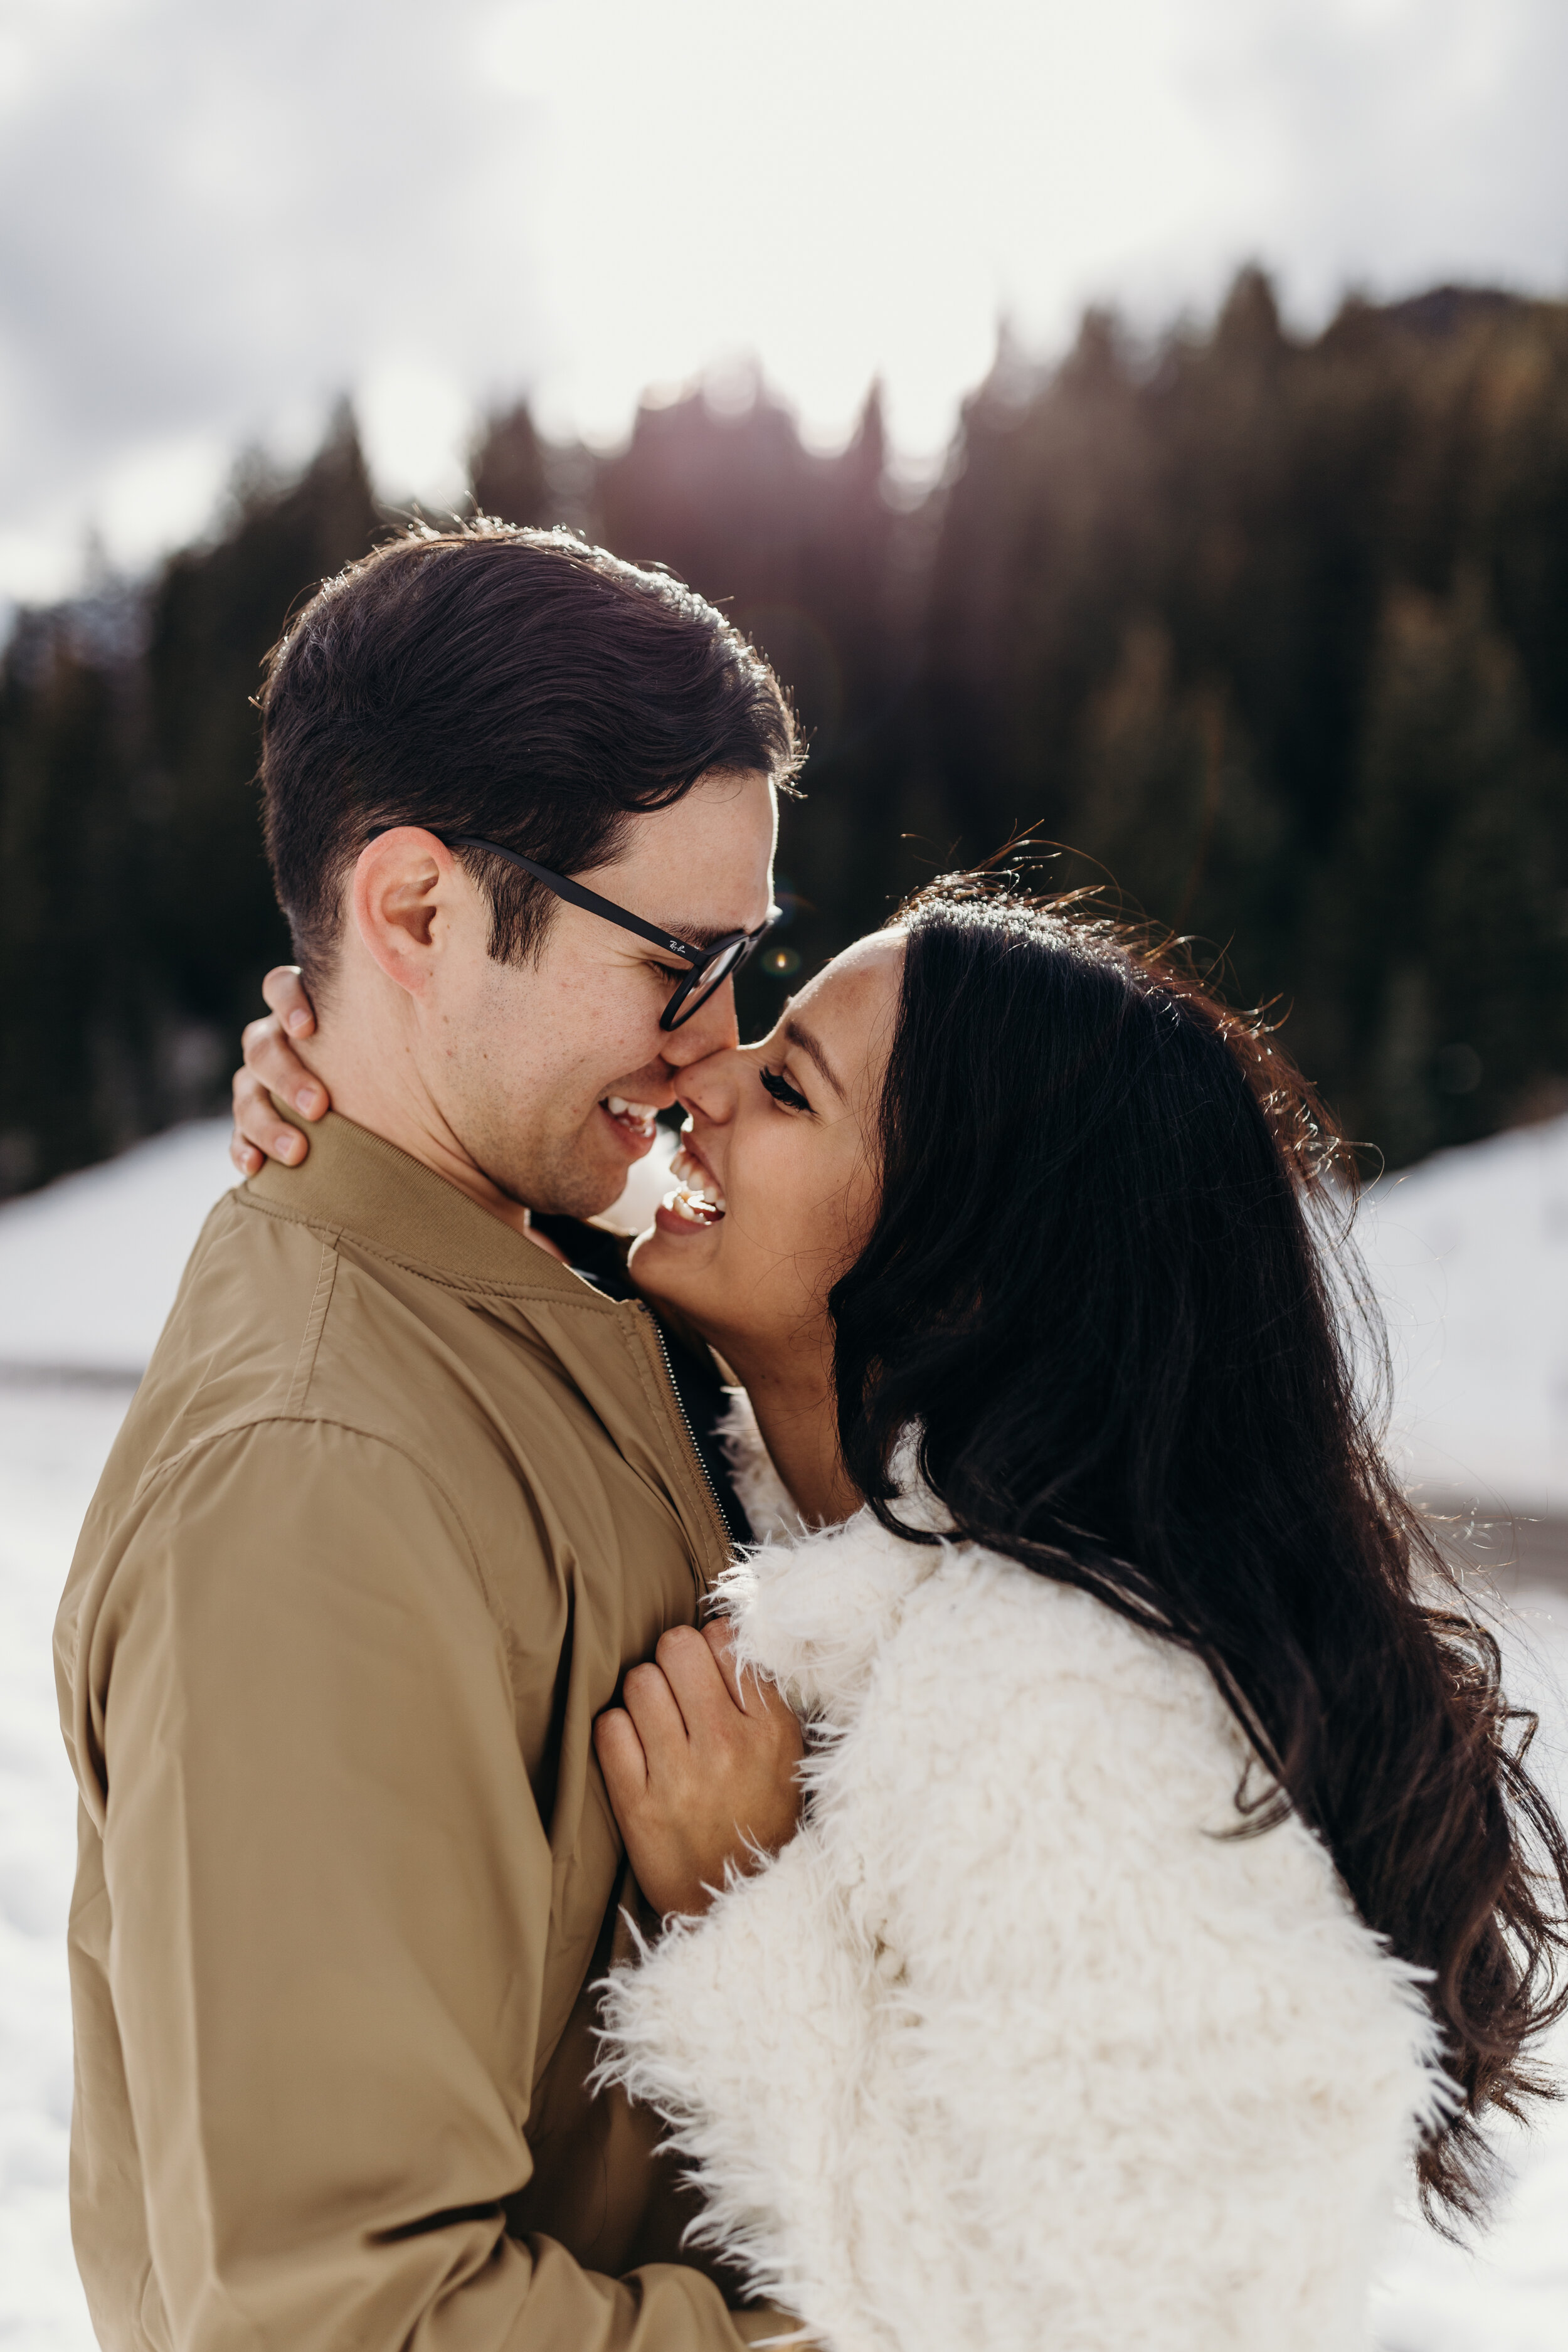 Cozy winter couple shoot snowy mountains engagement session photoshoot #coupleshoot #engagements #engagementshoot #weddingphotographer #utahphotographer sun flare